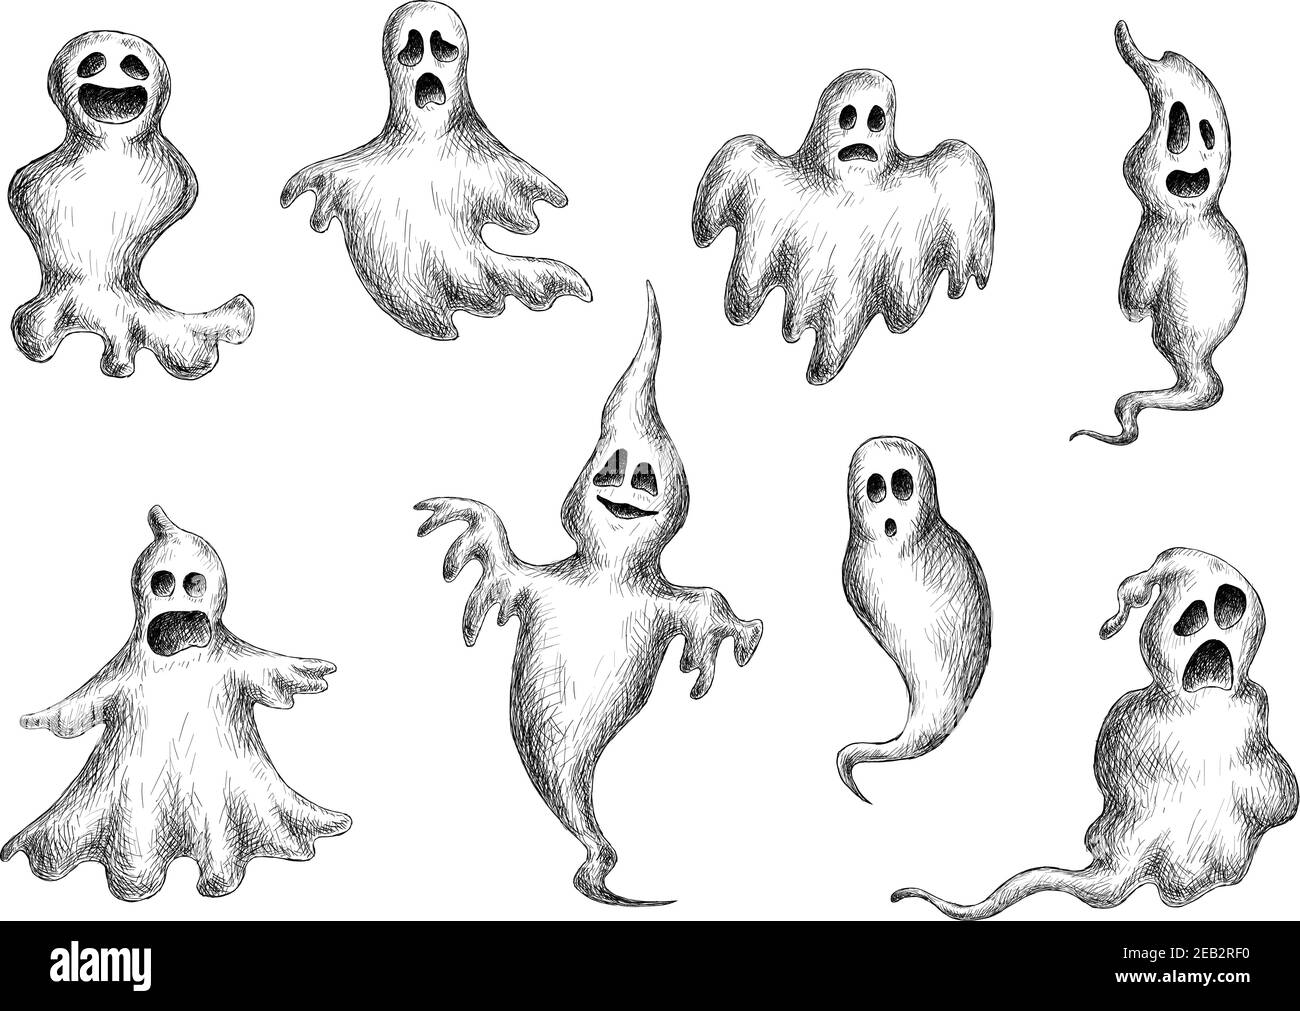 Flying ghost drawing